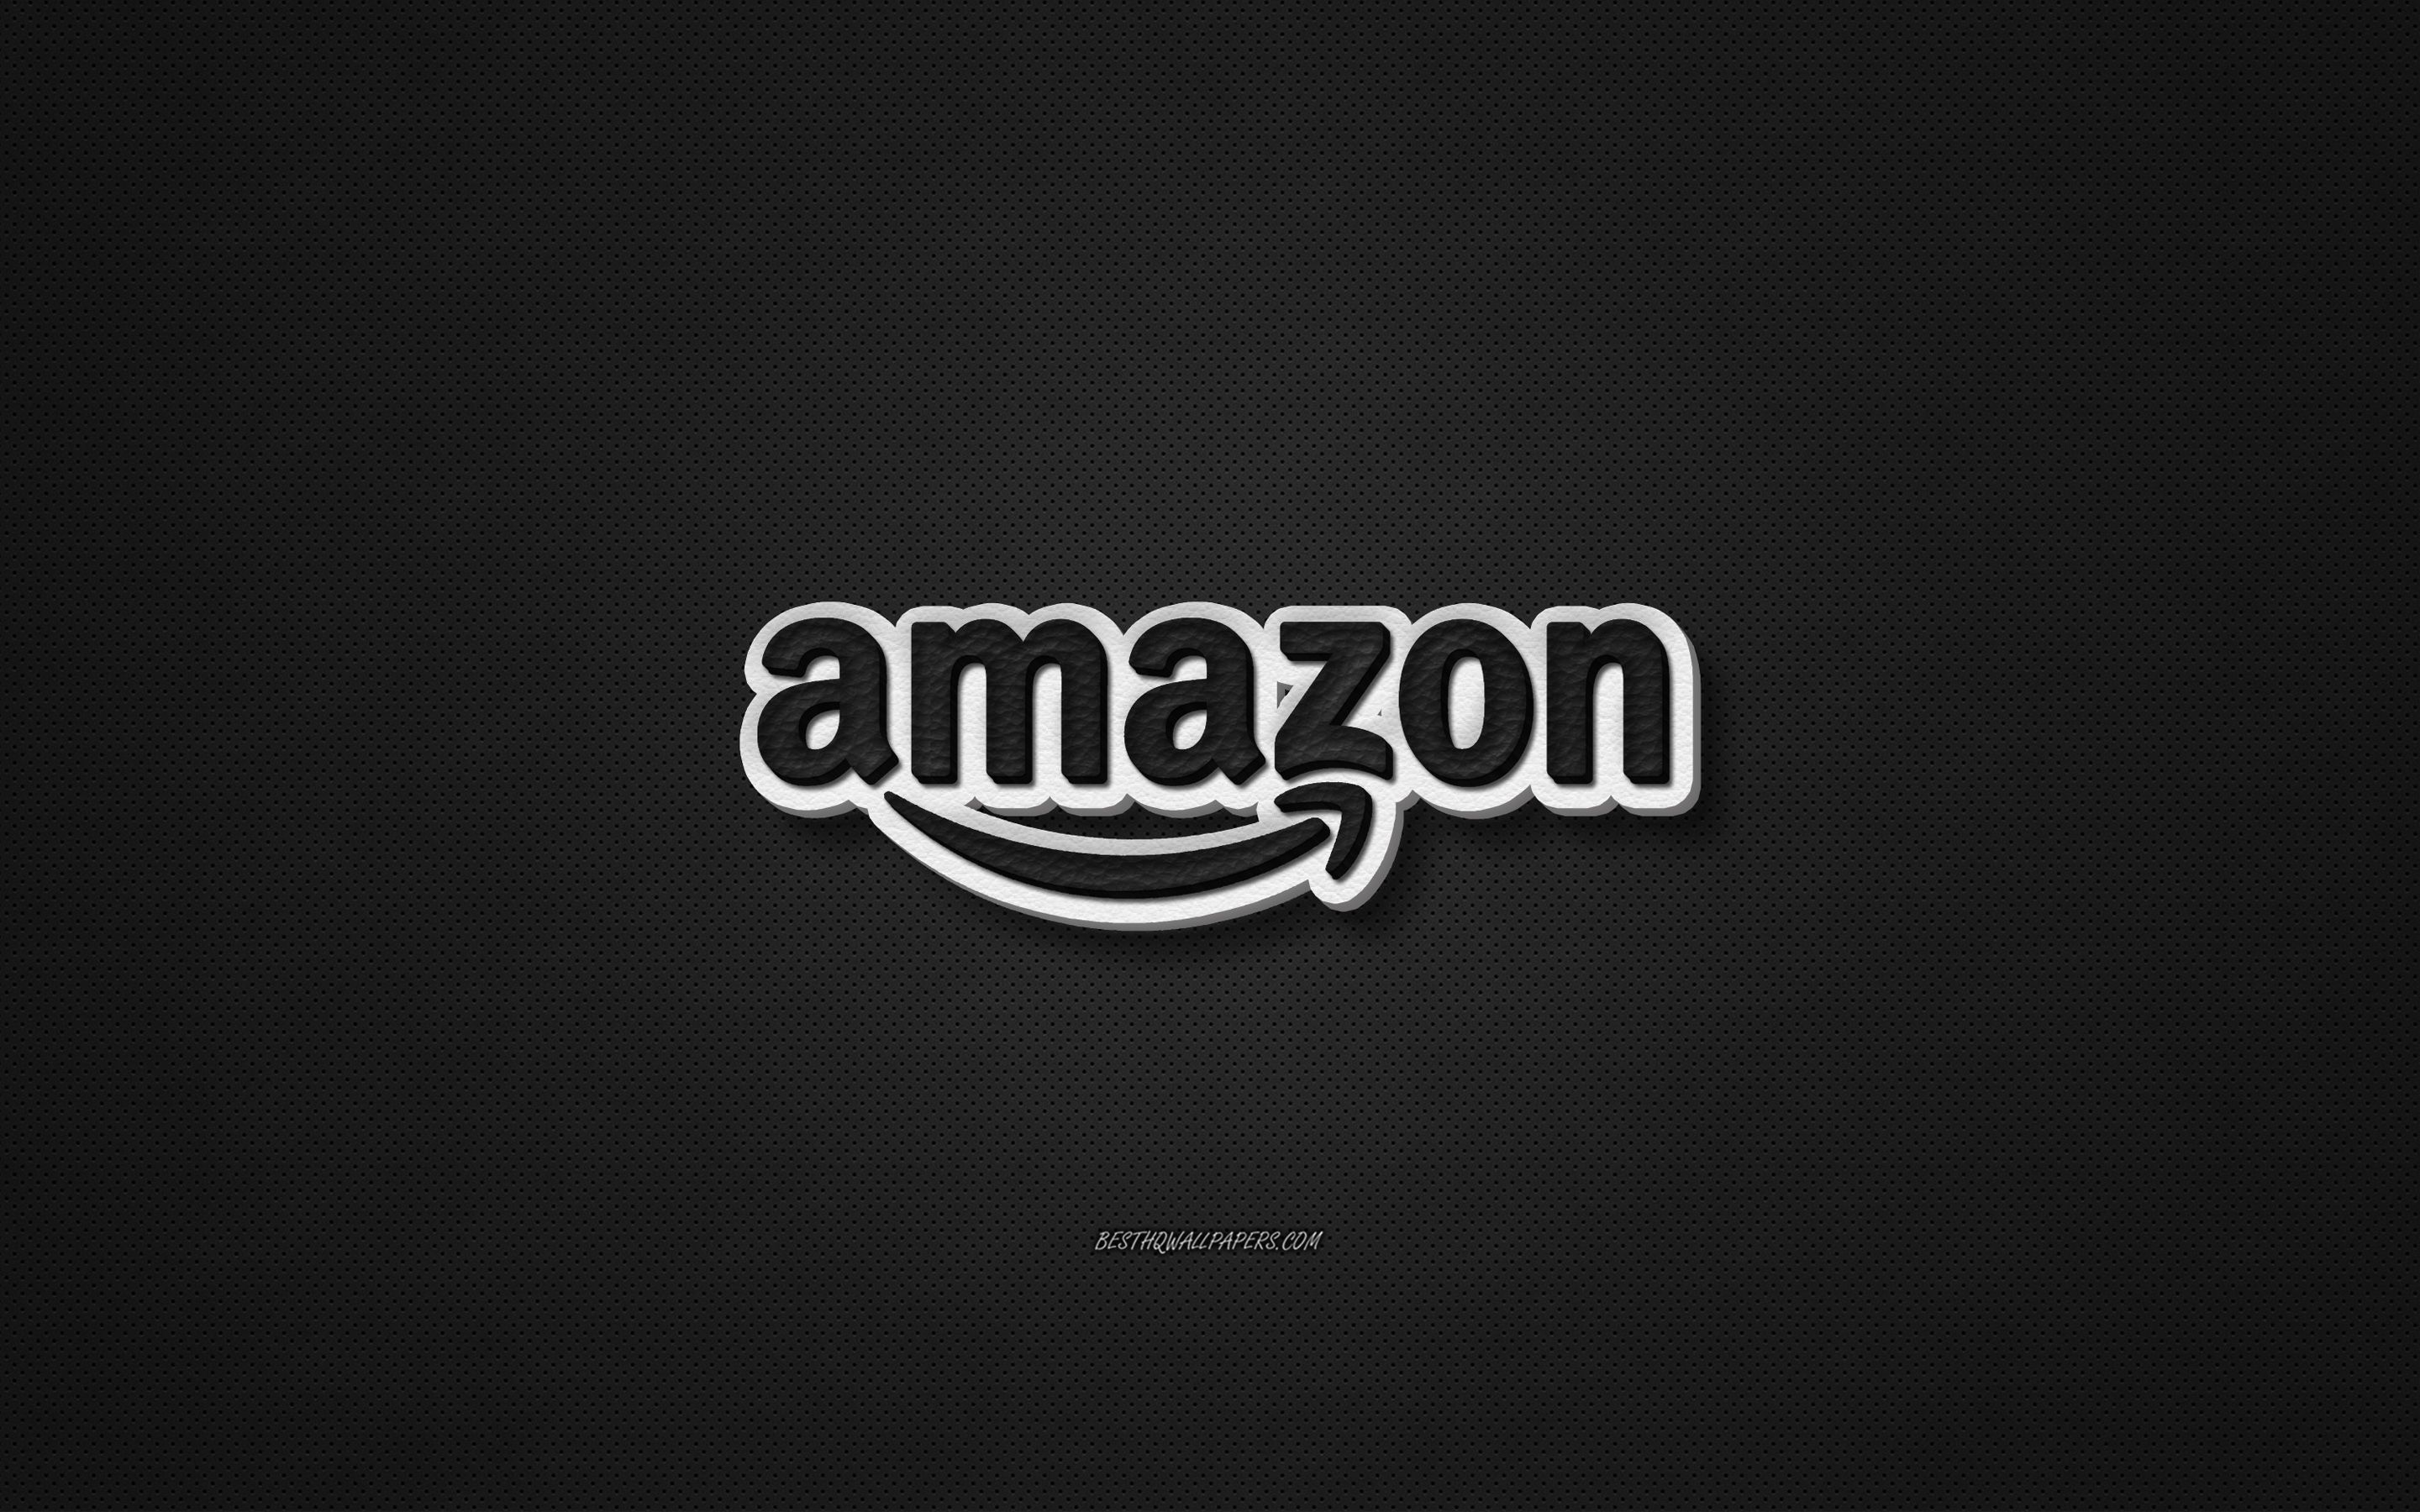 Download wallpapers Amazon leather logo, black leather texture, emblem, Amazon, creative art, black background, Amazon logo for desktop with resolution 2880x1800. High Quality HD pictures wallpapers